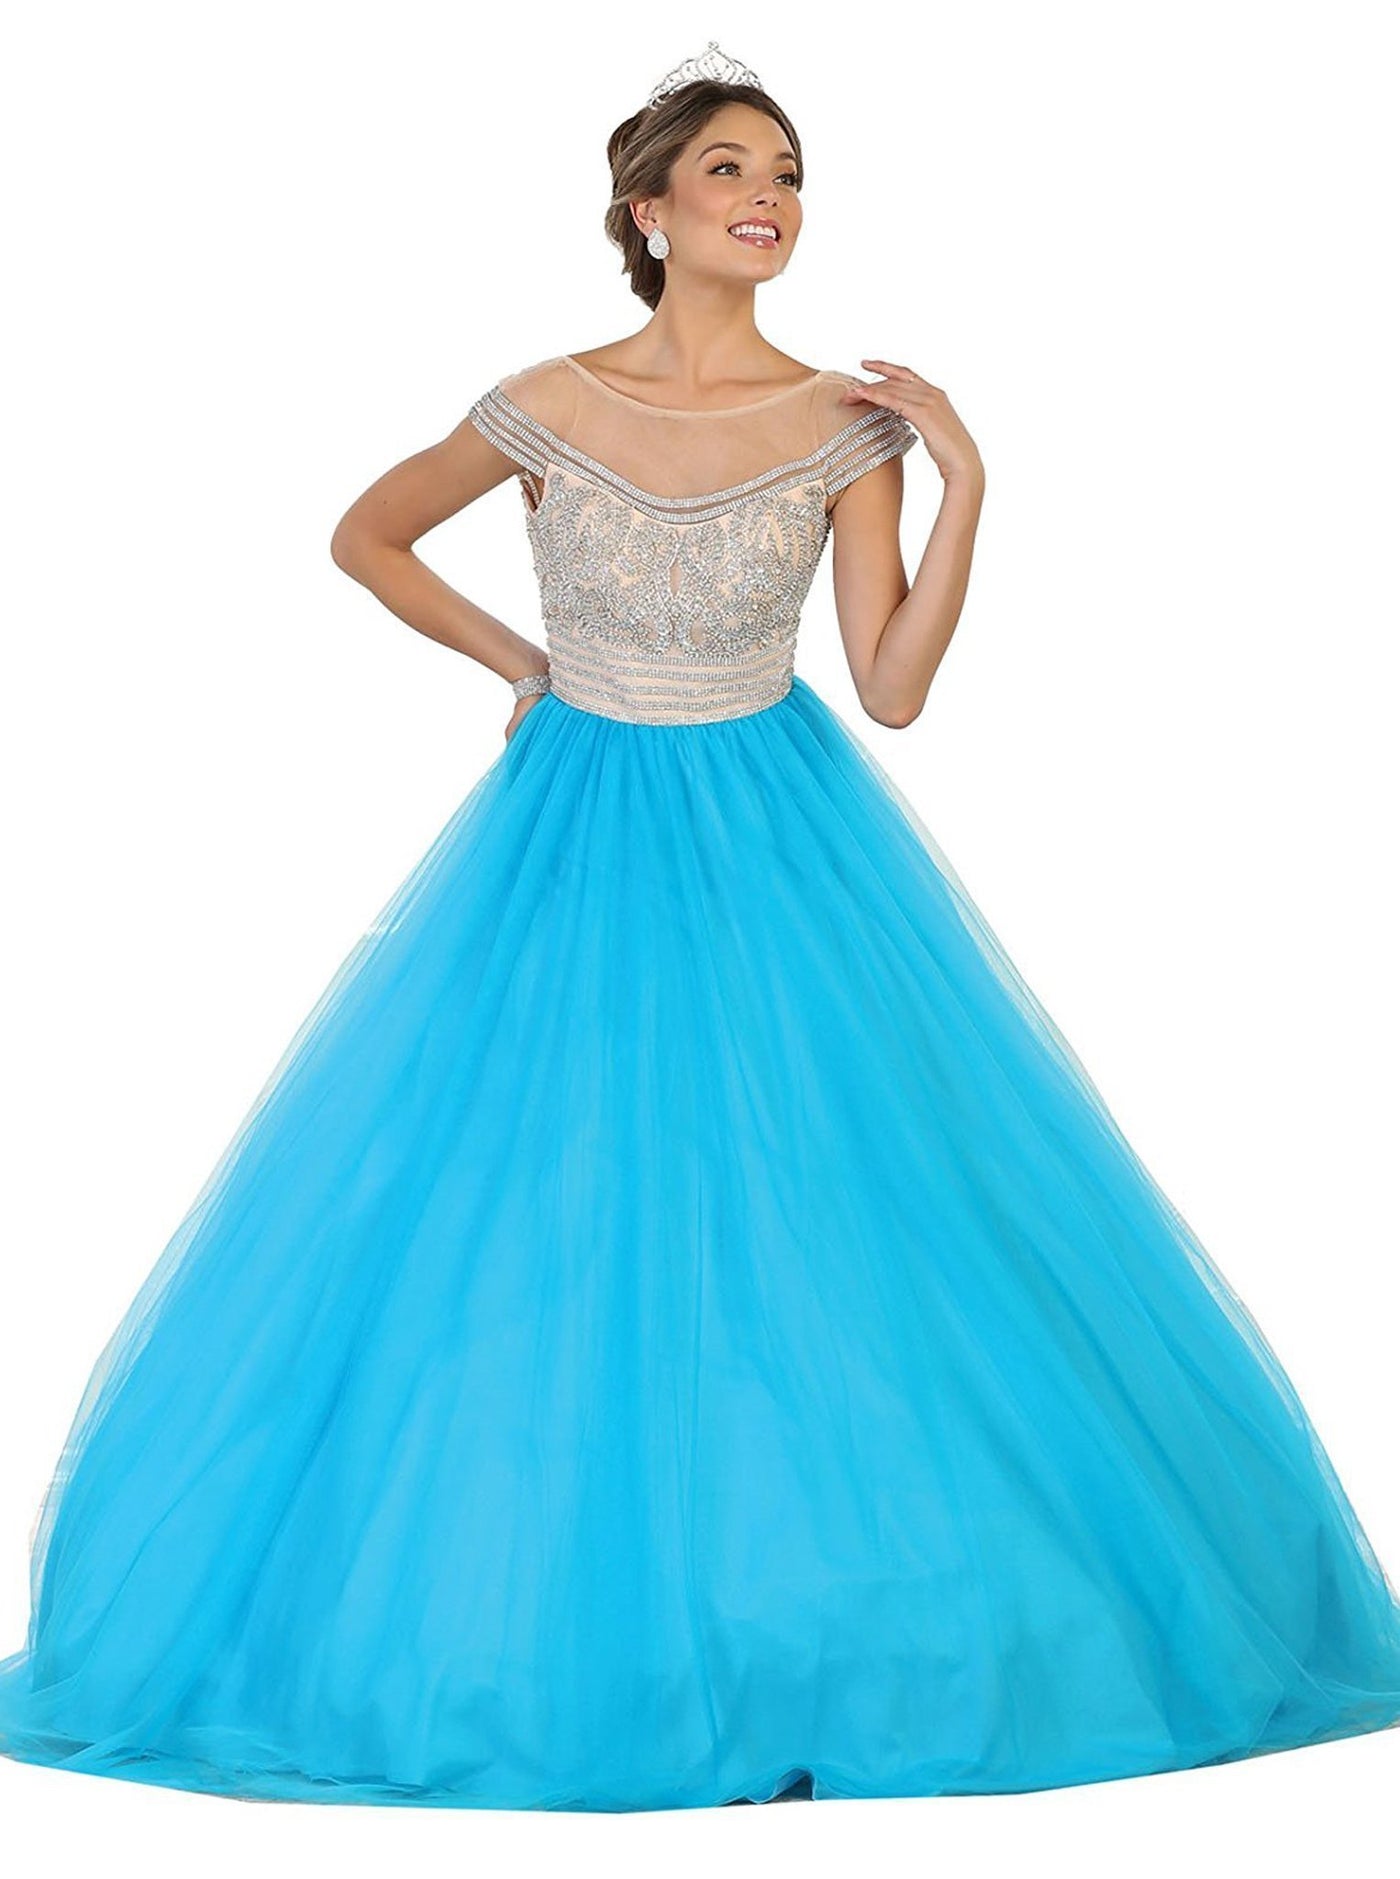 May Queen - LK87 Cap Sleeve Crystal Embellished Quinceanera Ballgown In Blue